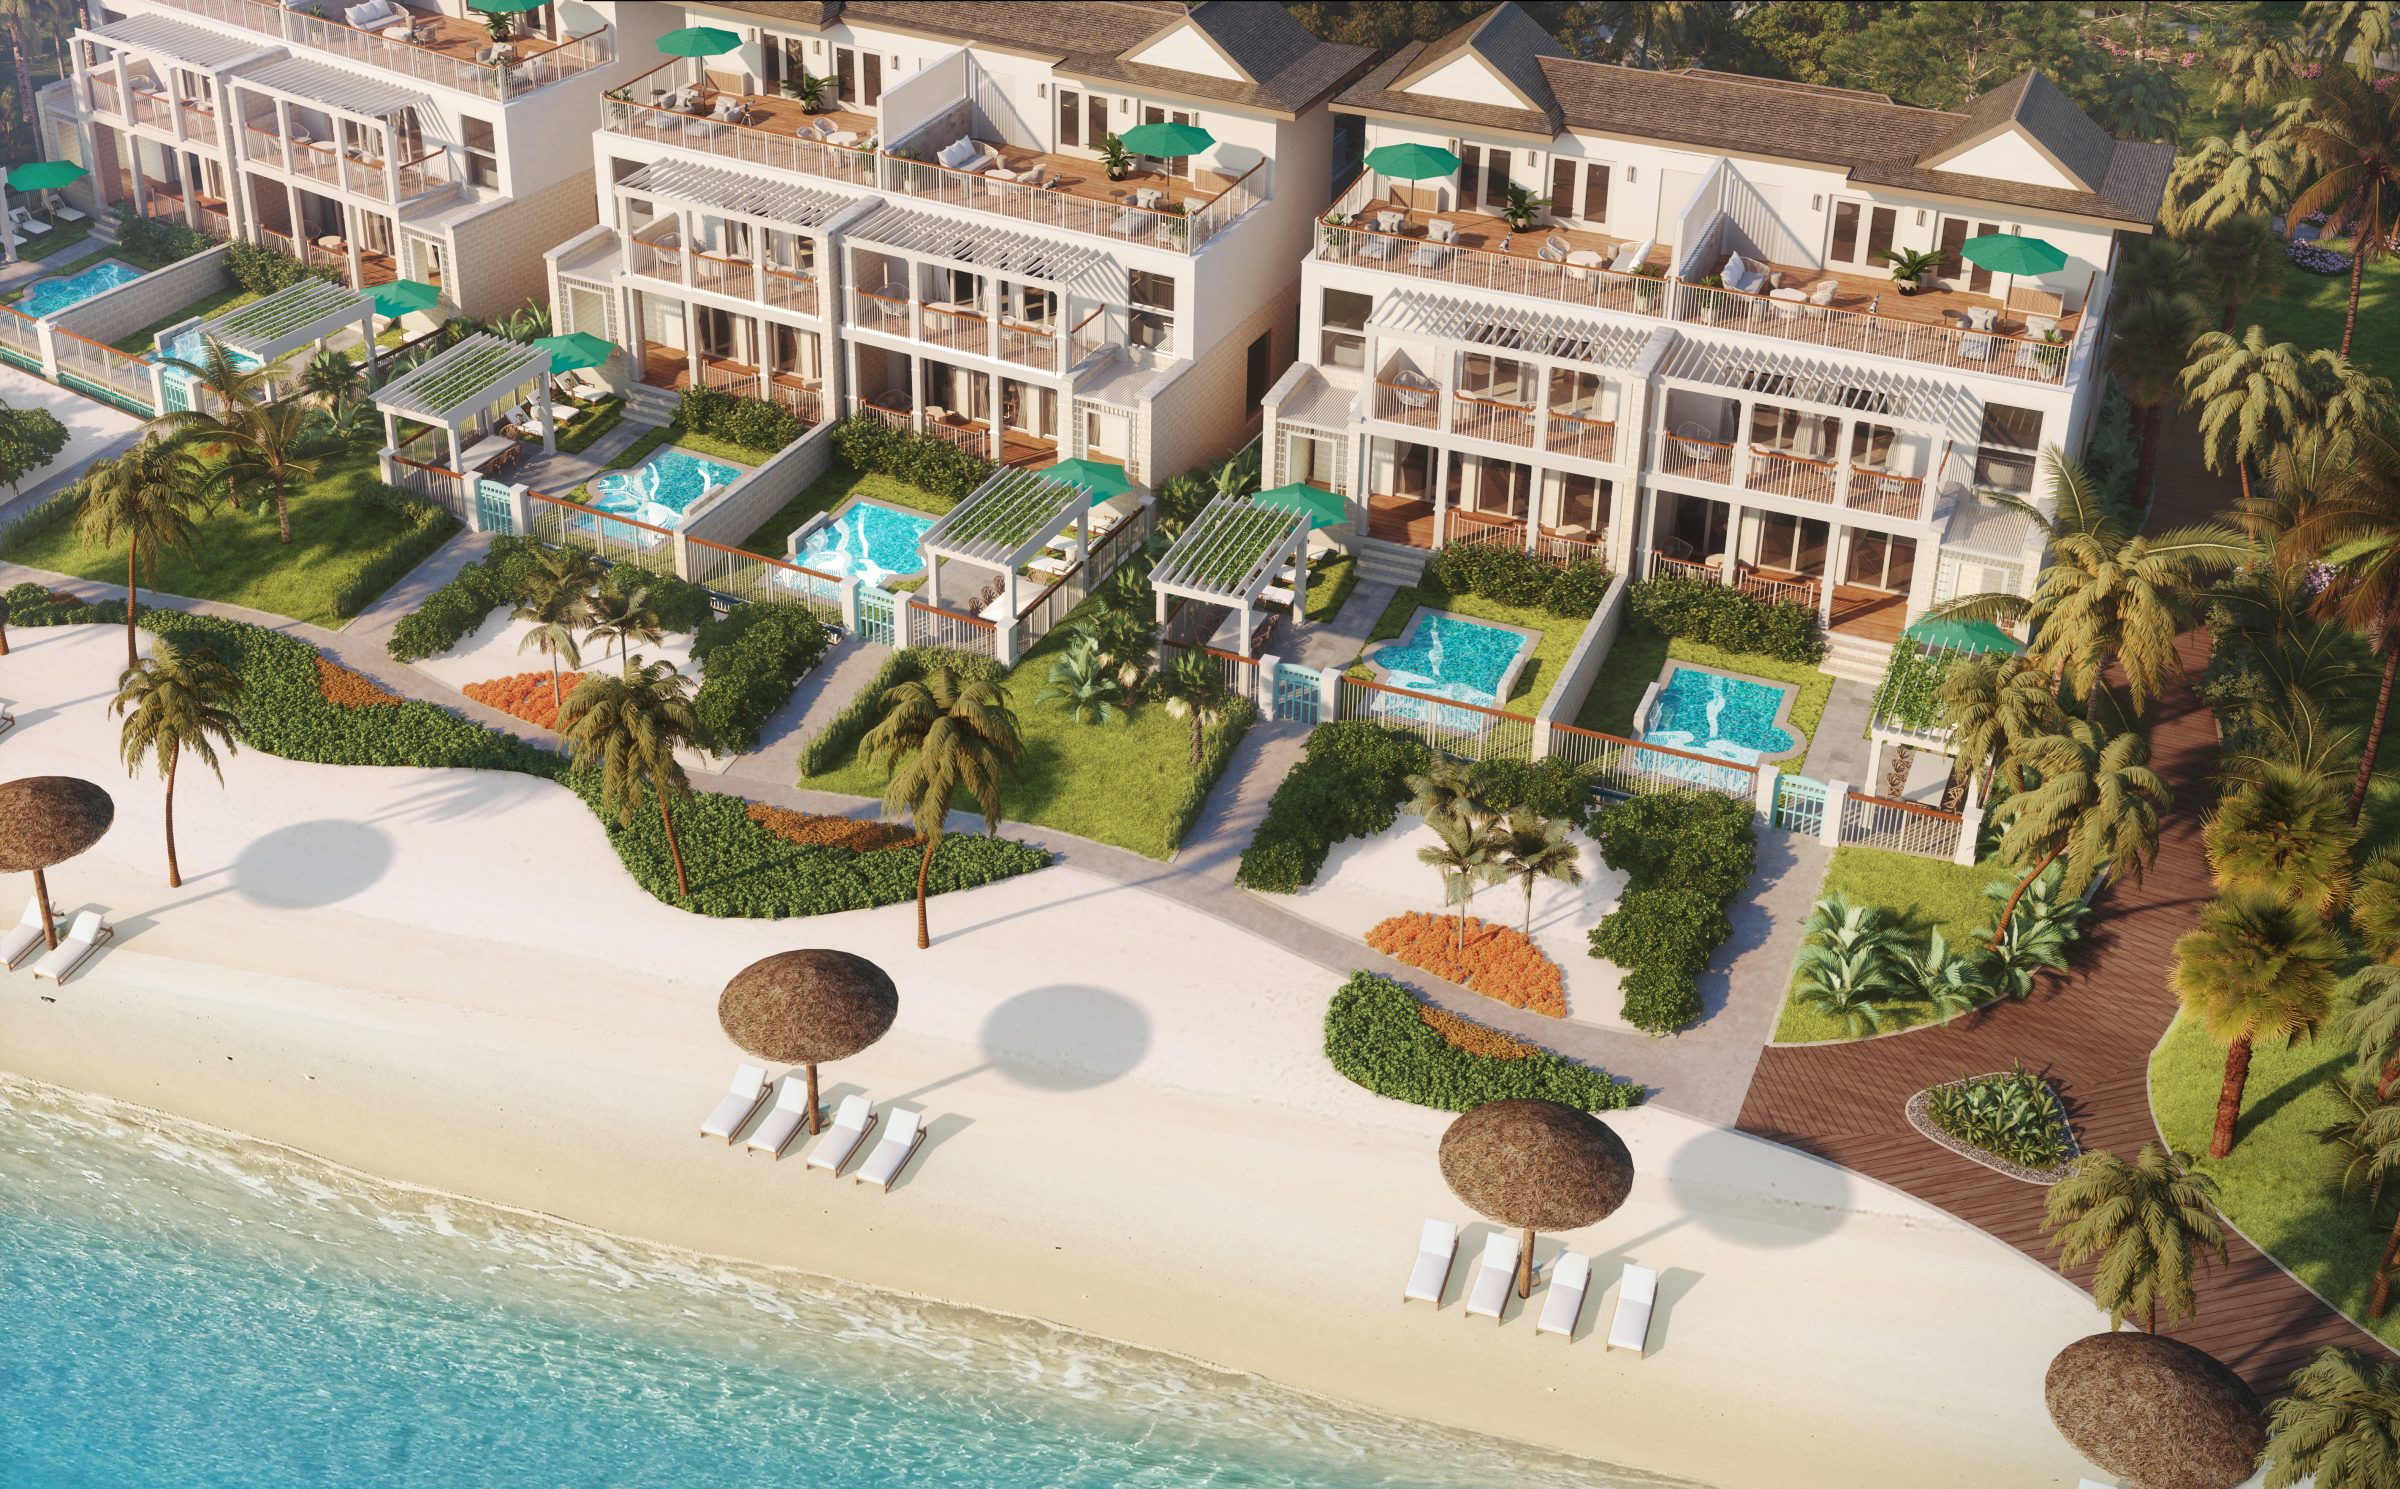 The new suites at Sandals Negril Beach Resort | St Lucia